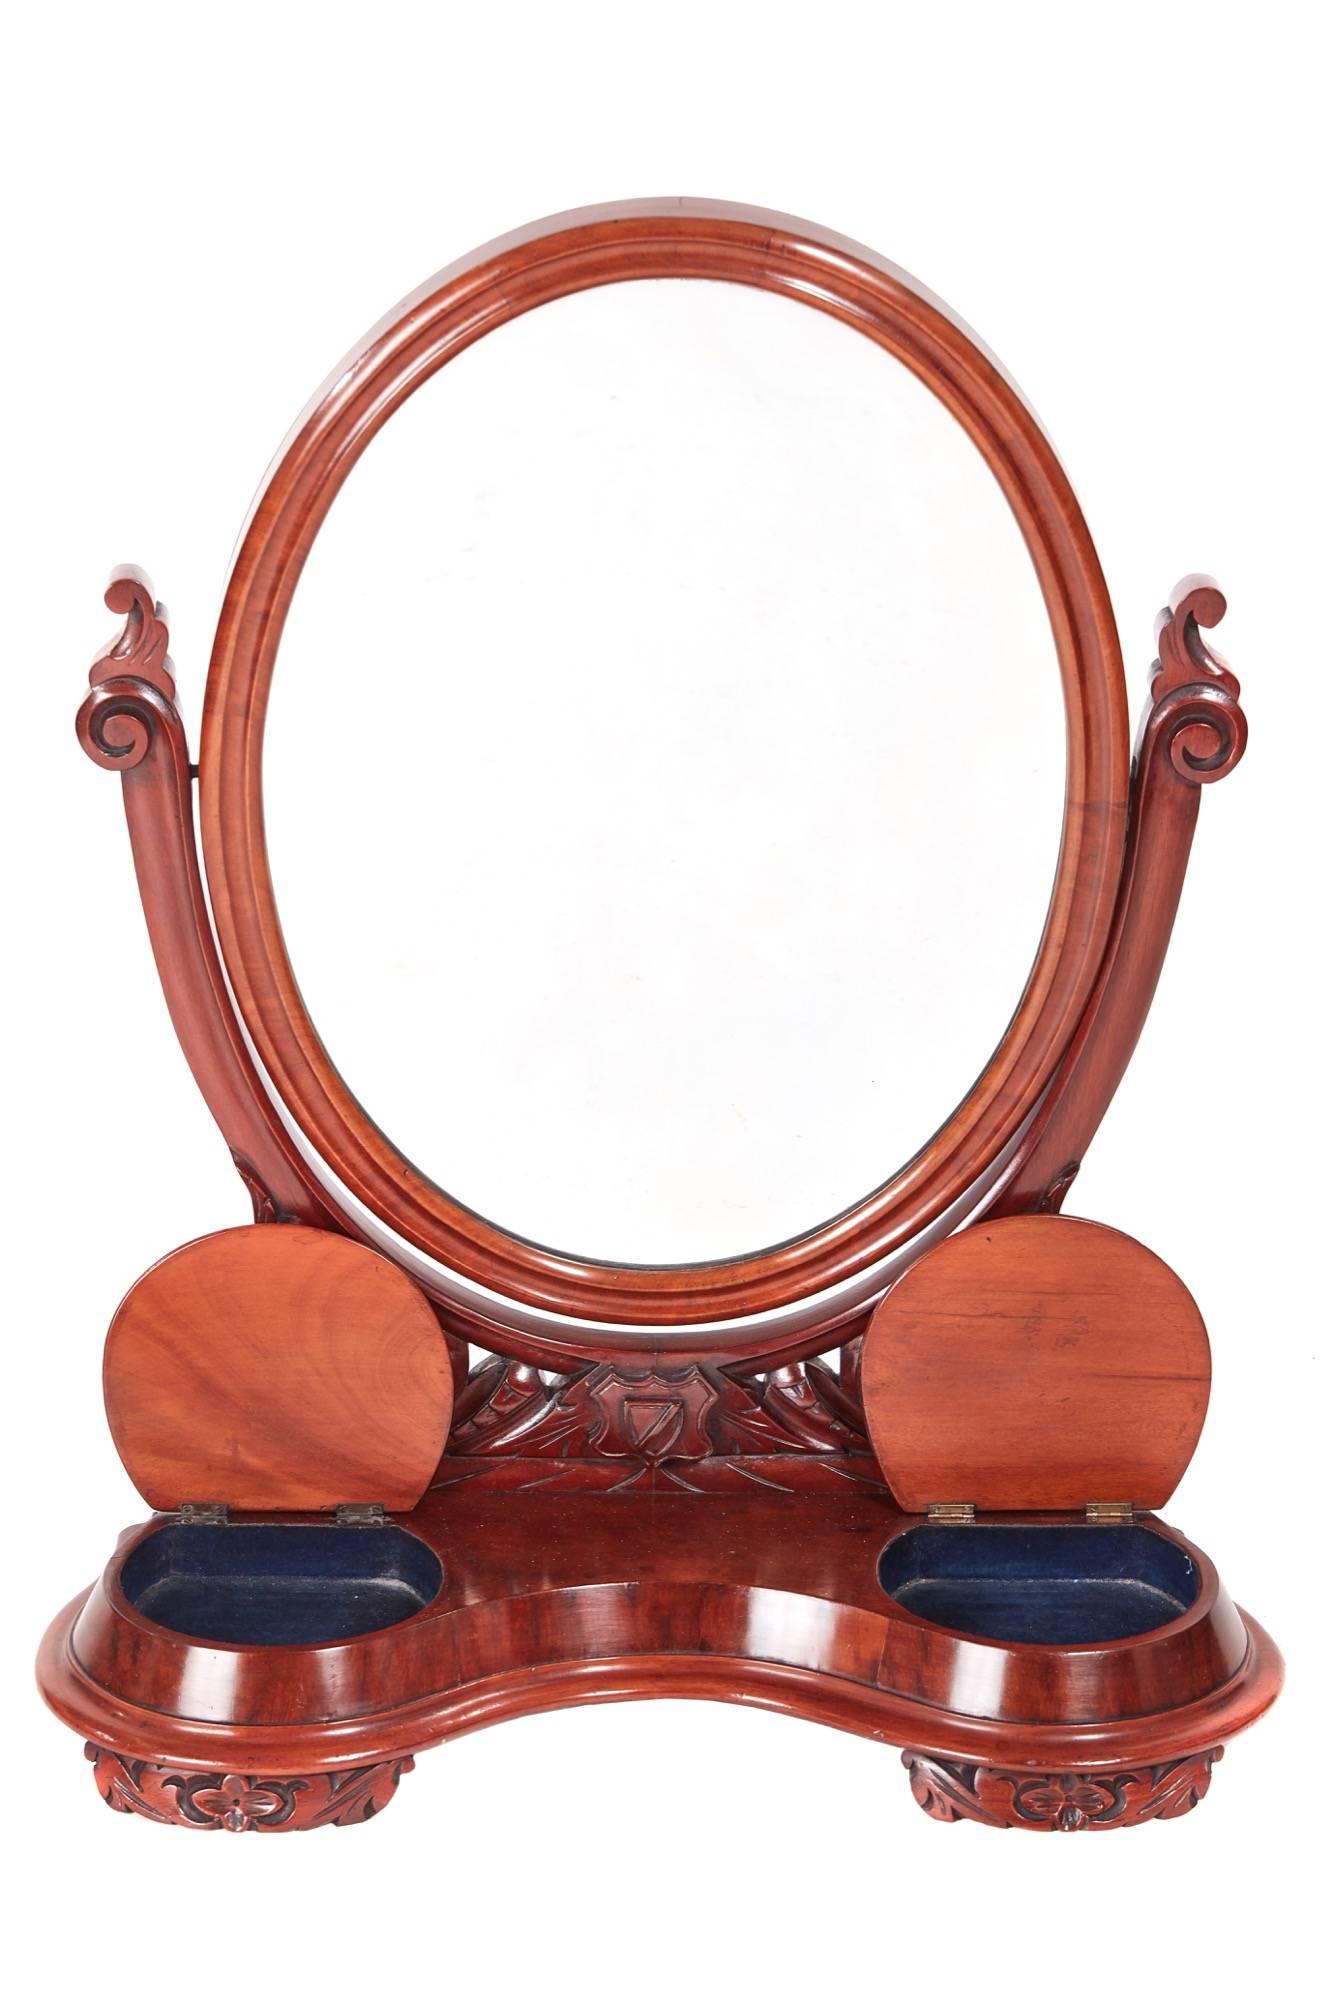 Quality antique Victorian mahogany dressing table mirror, the oval swing mirror with thumb moulded frame supported by lovely carved shaped arms, serpentine shaped base with two lift up compartments, standing on carved feet
Lovely colour and